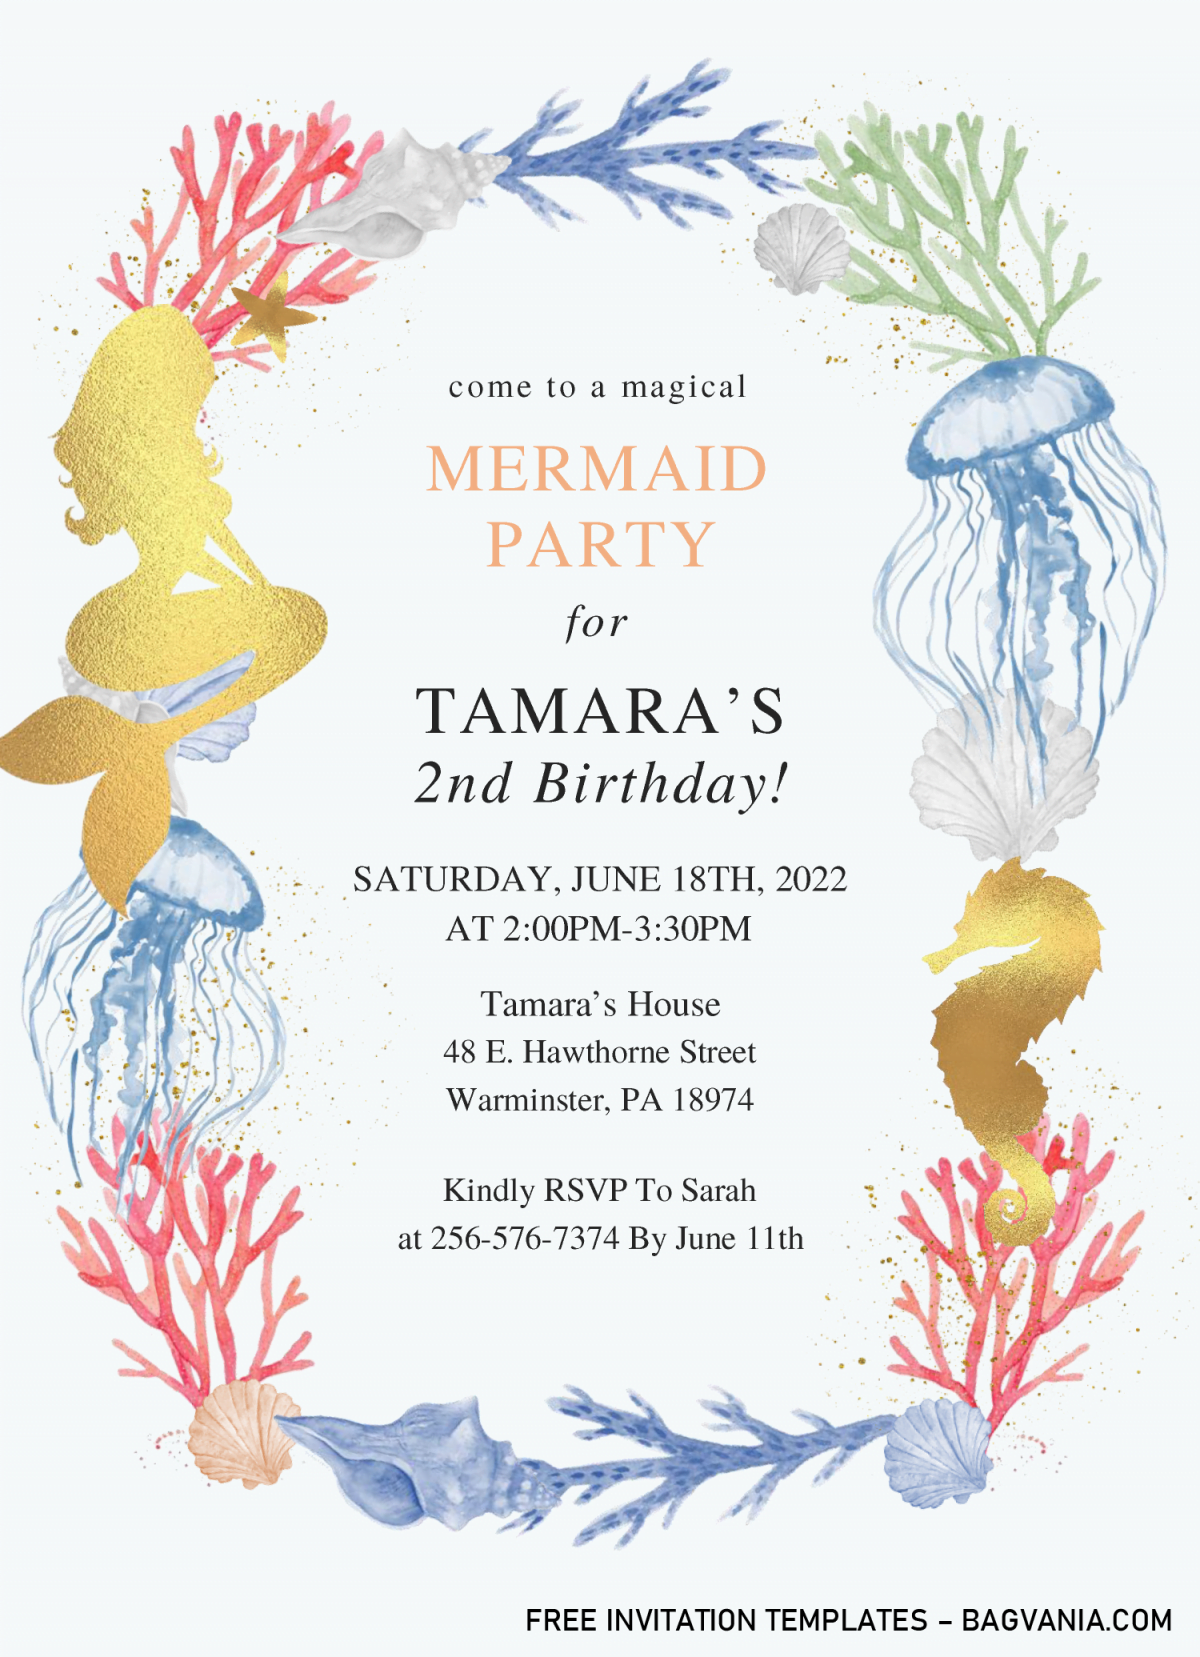 Mermaid Party Invitation Templates - Editable With Microsoft Word and has gold seahorse